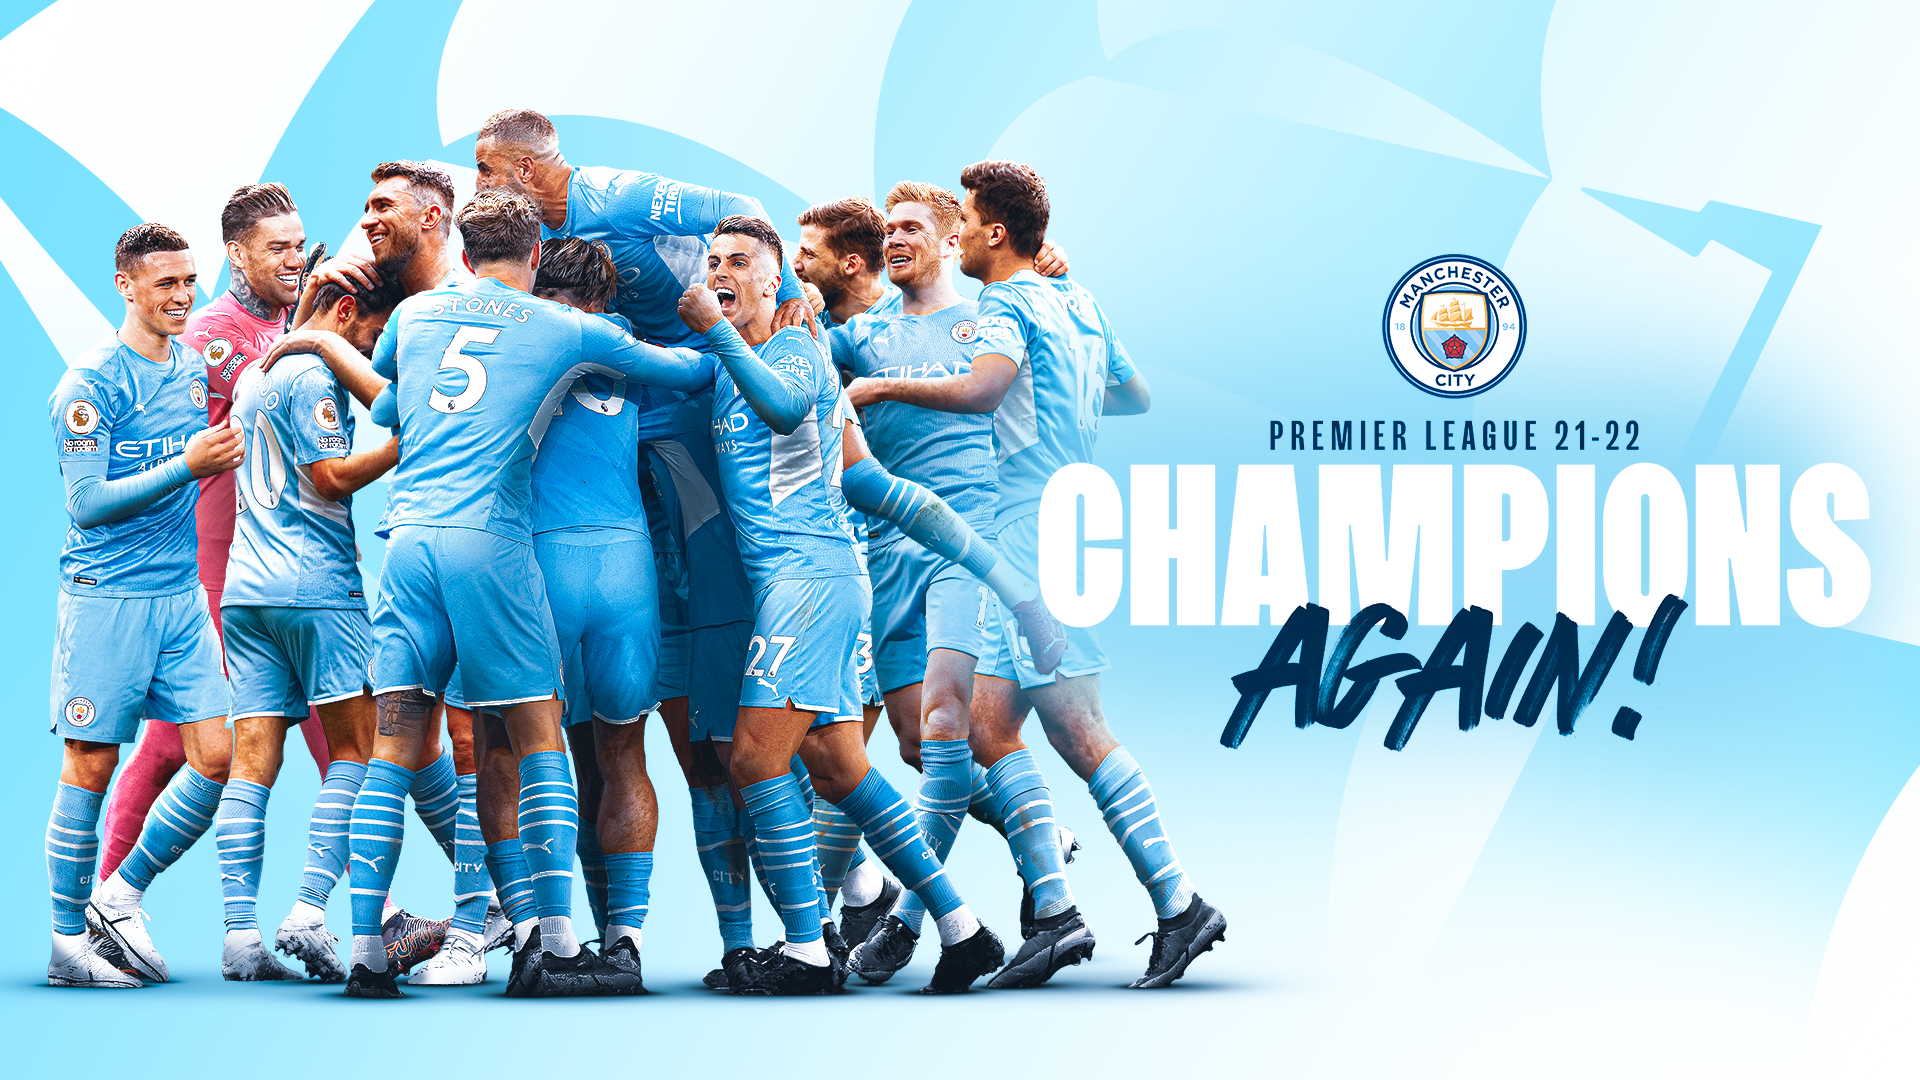 Be part of City's Champions Fan Mosaic